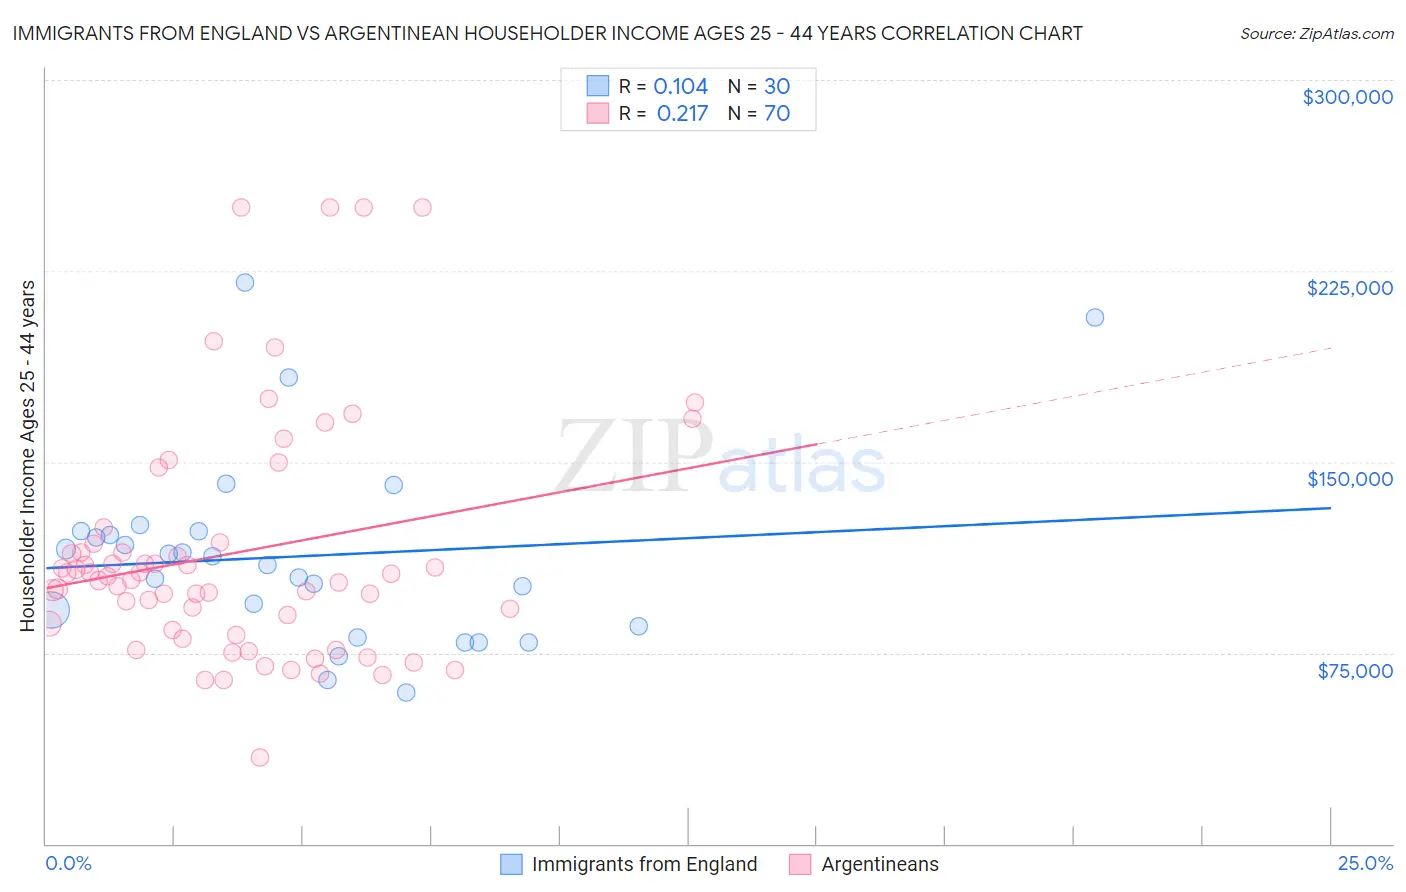 Immigrants from England vs Argentinean Householder Income Ages 25 - 44 years